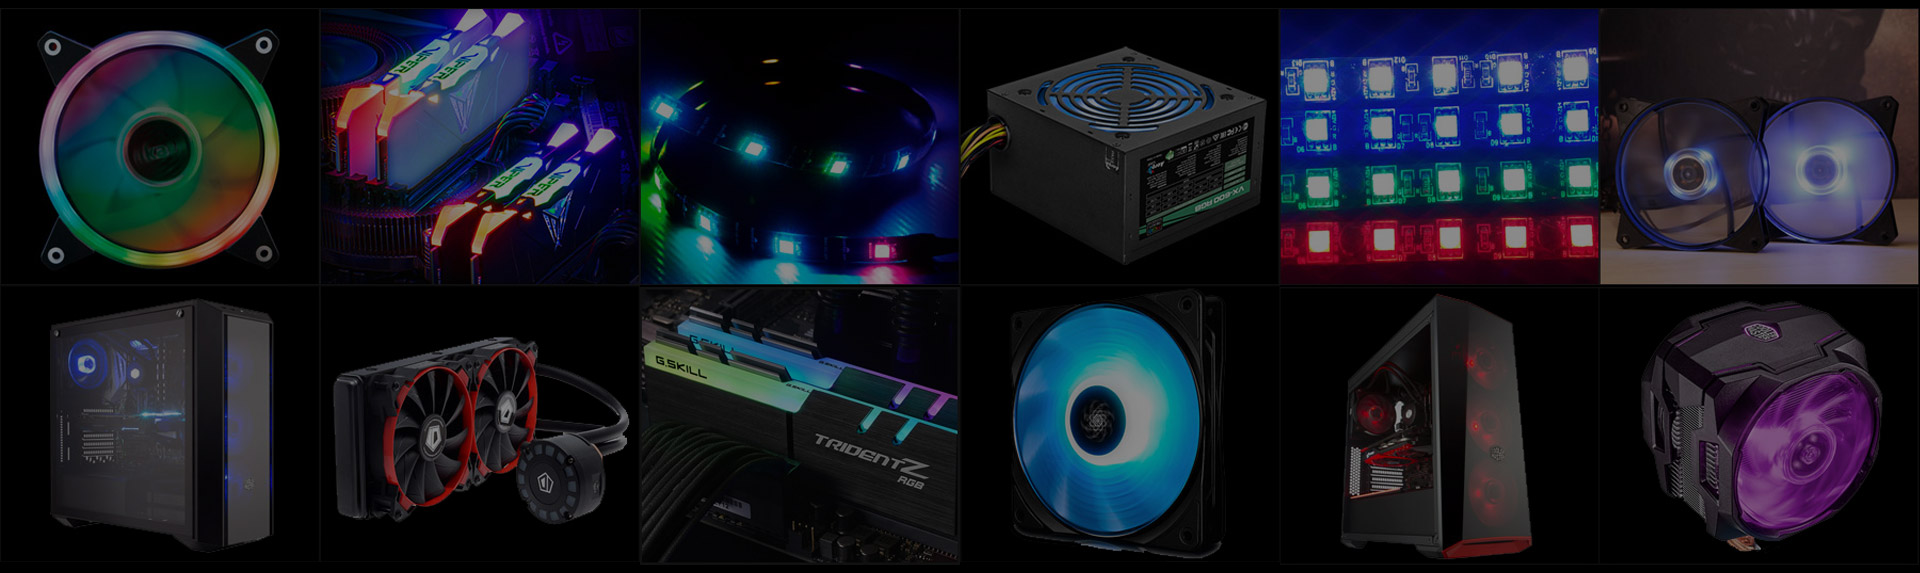 Different RGB lit components including: graphics card, case fans, memory, light strips, power supply and cases with fans installed